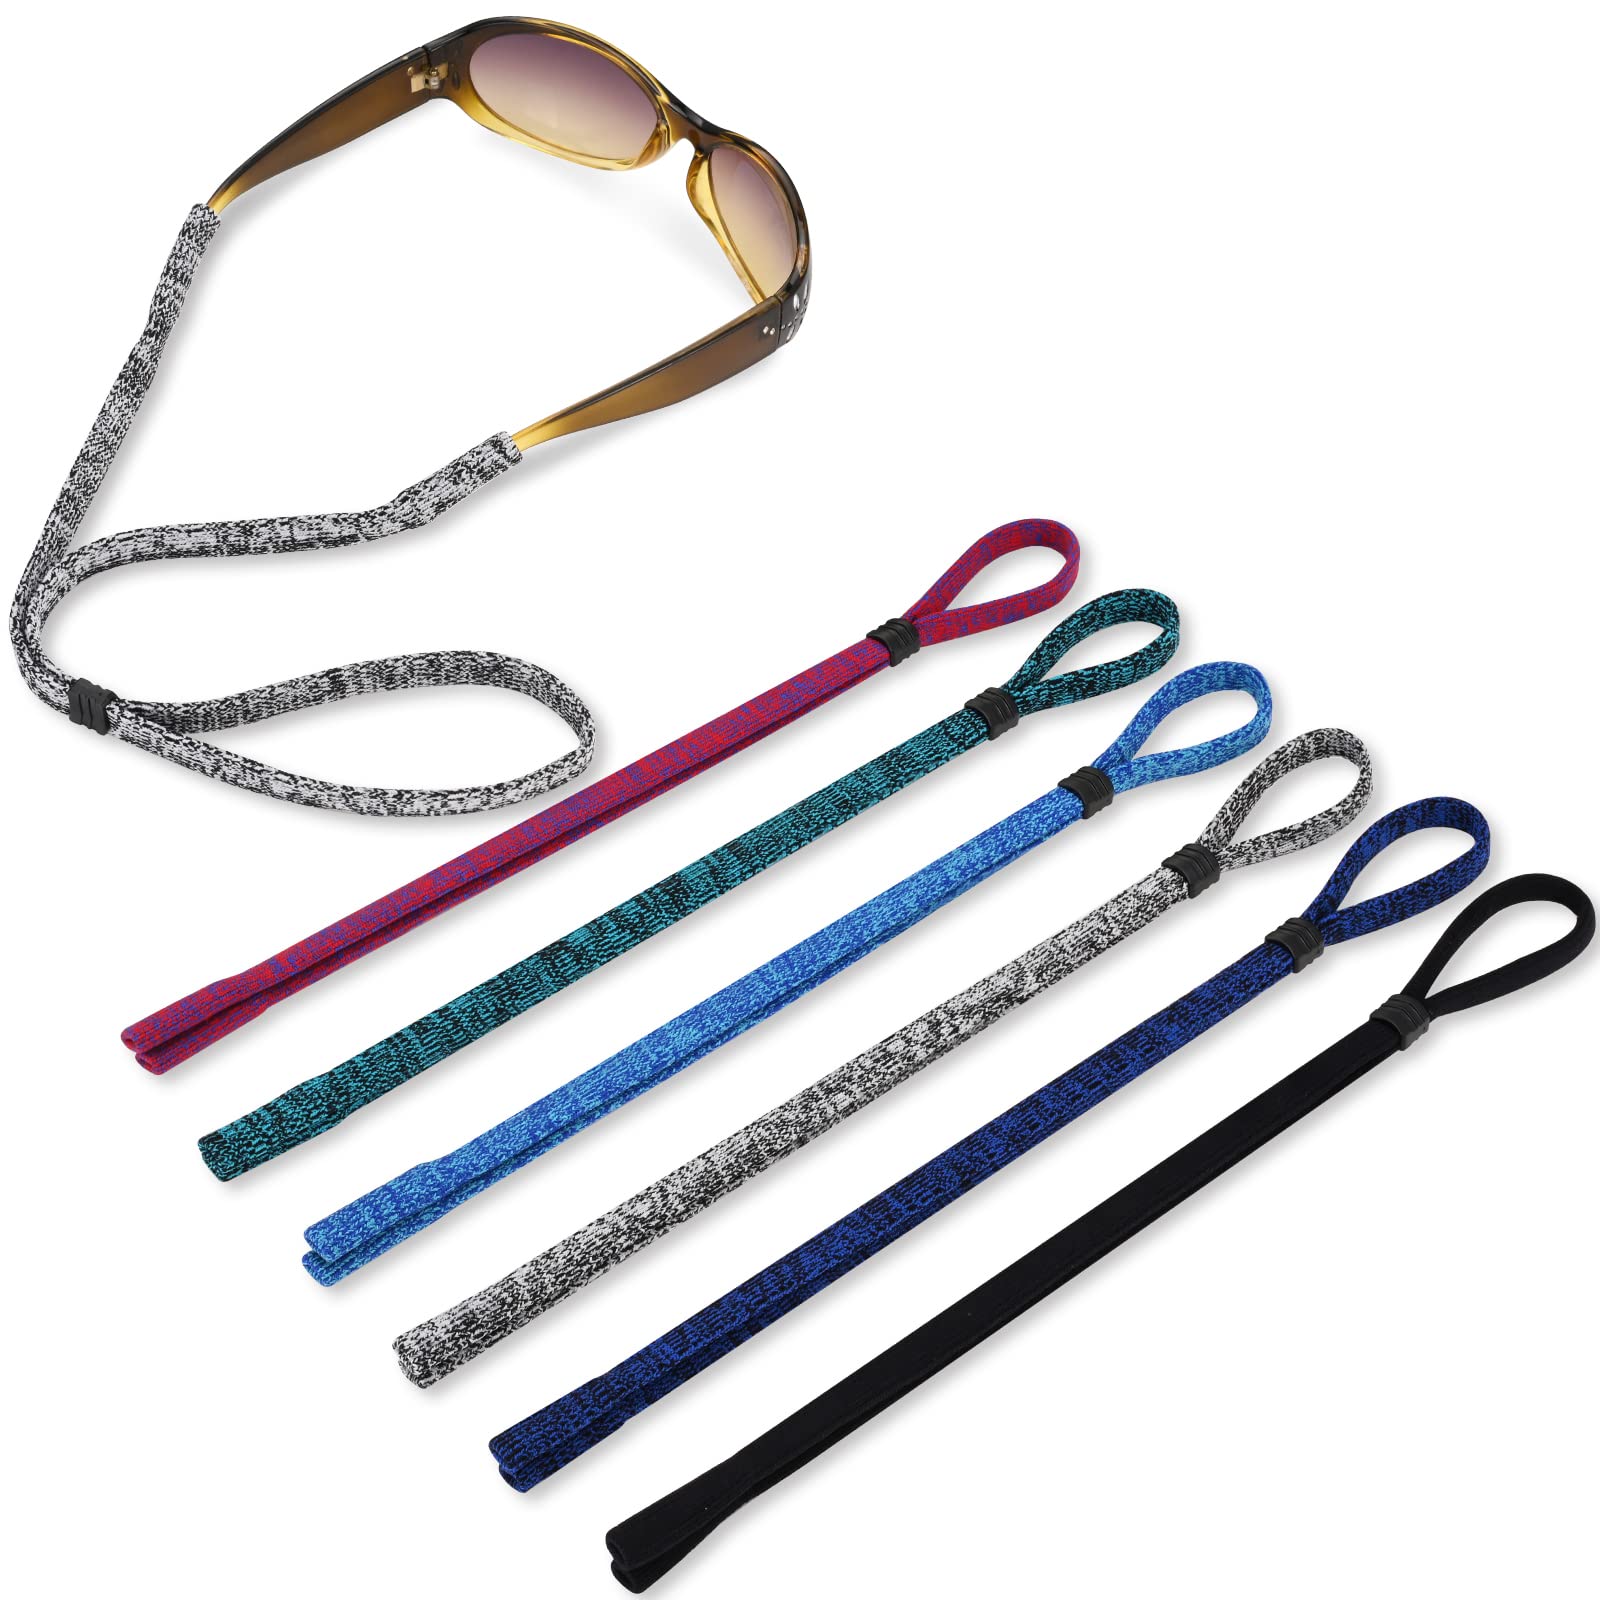 HENOALR glasses Strap and glasses Holder Strap Eyewear Retainer Sports glasses Strap Mixed colors Well Work and Keep Your glasse